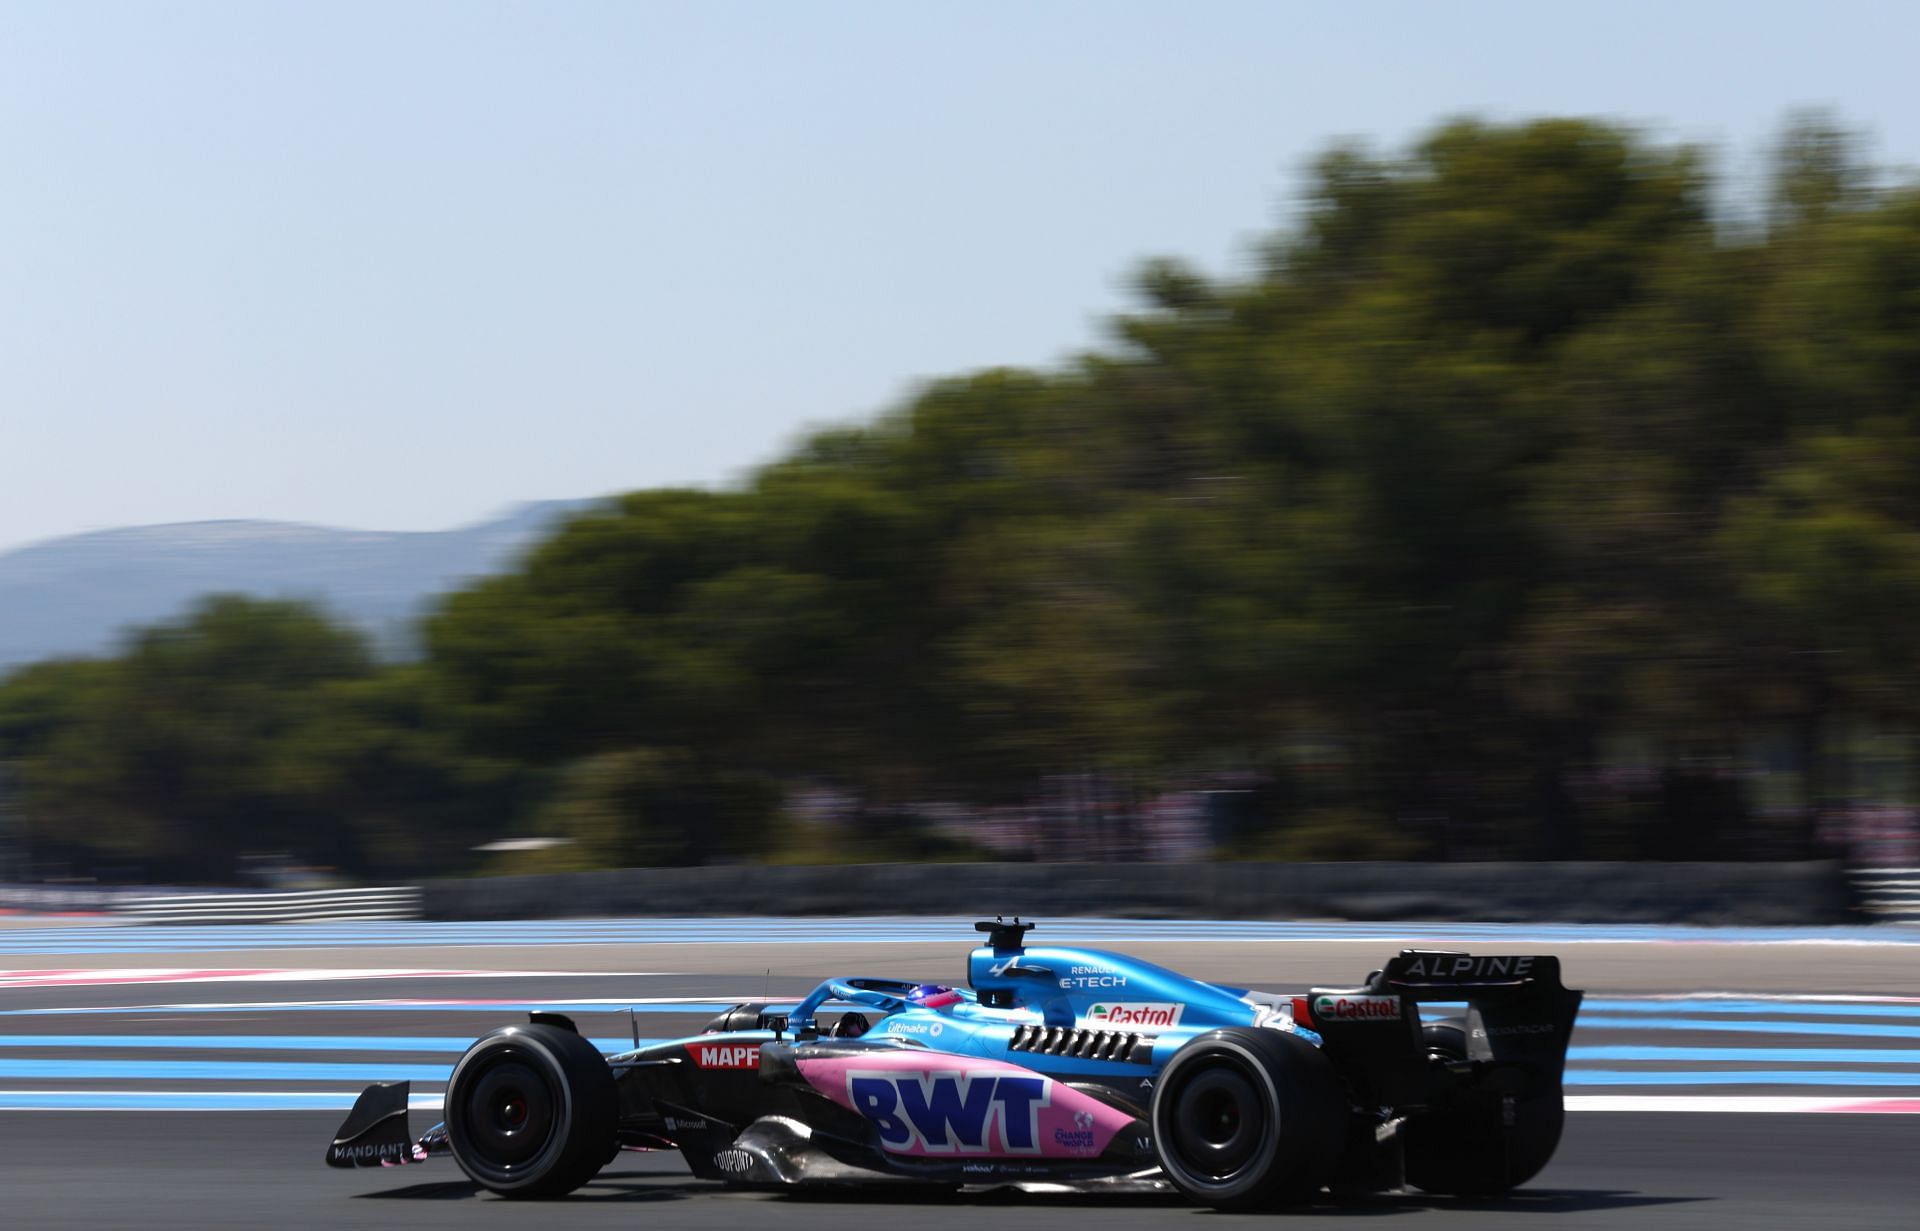 Alpine driver Fernando Alonso in action during the 2022 F1 French GP. (Photo by Clive Rose/Getty Images)